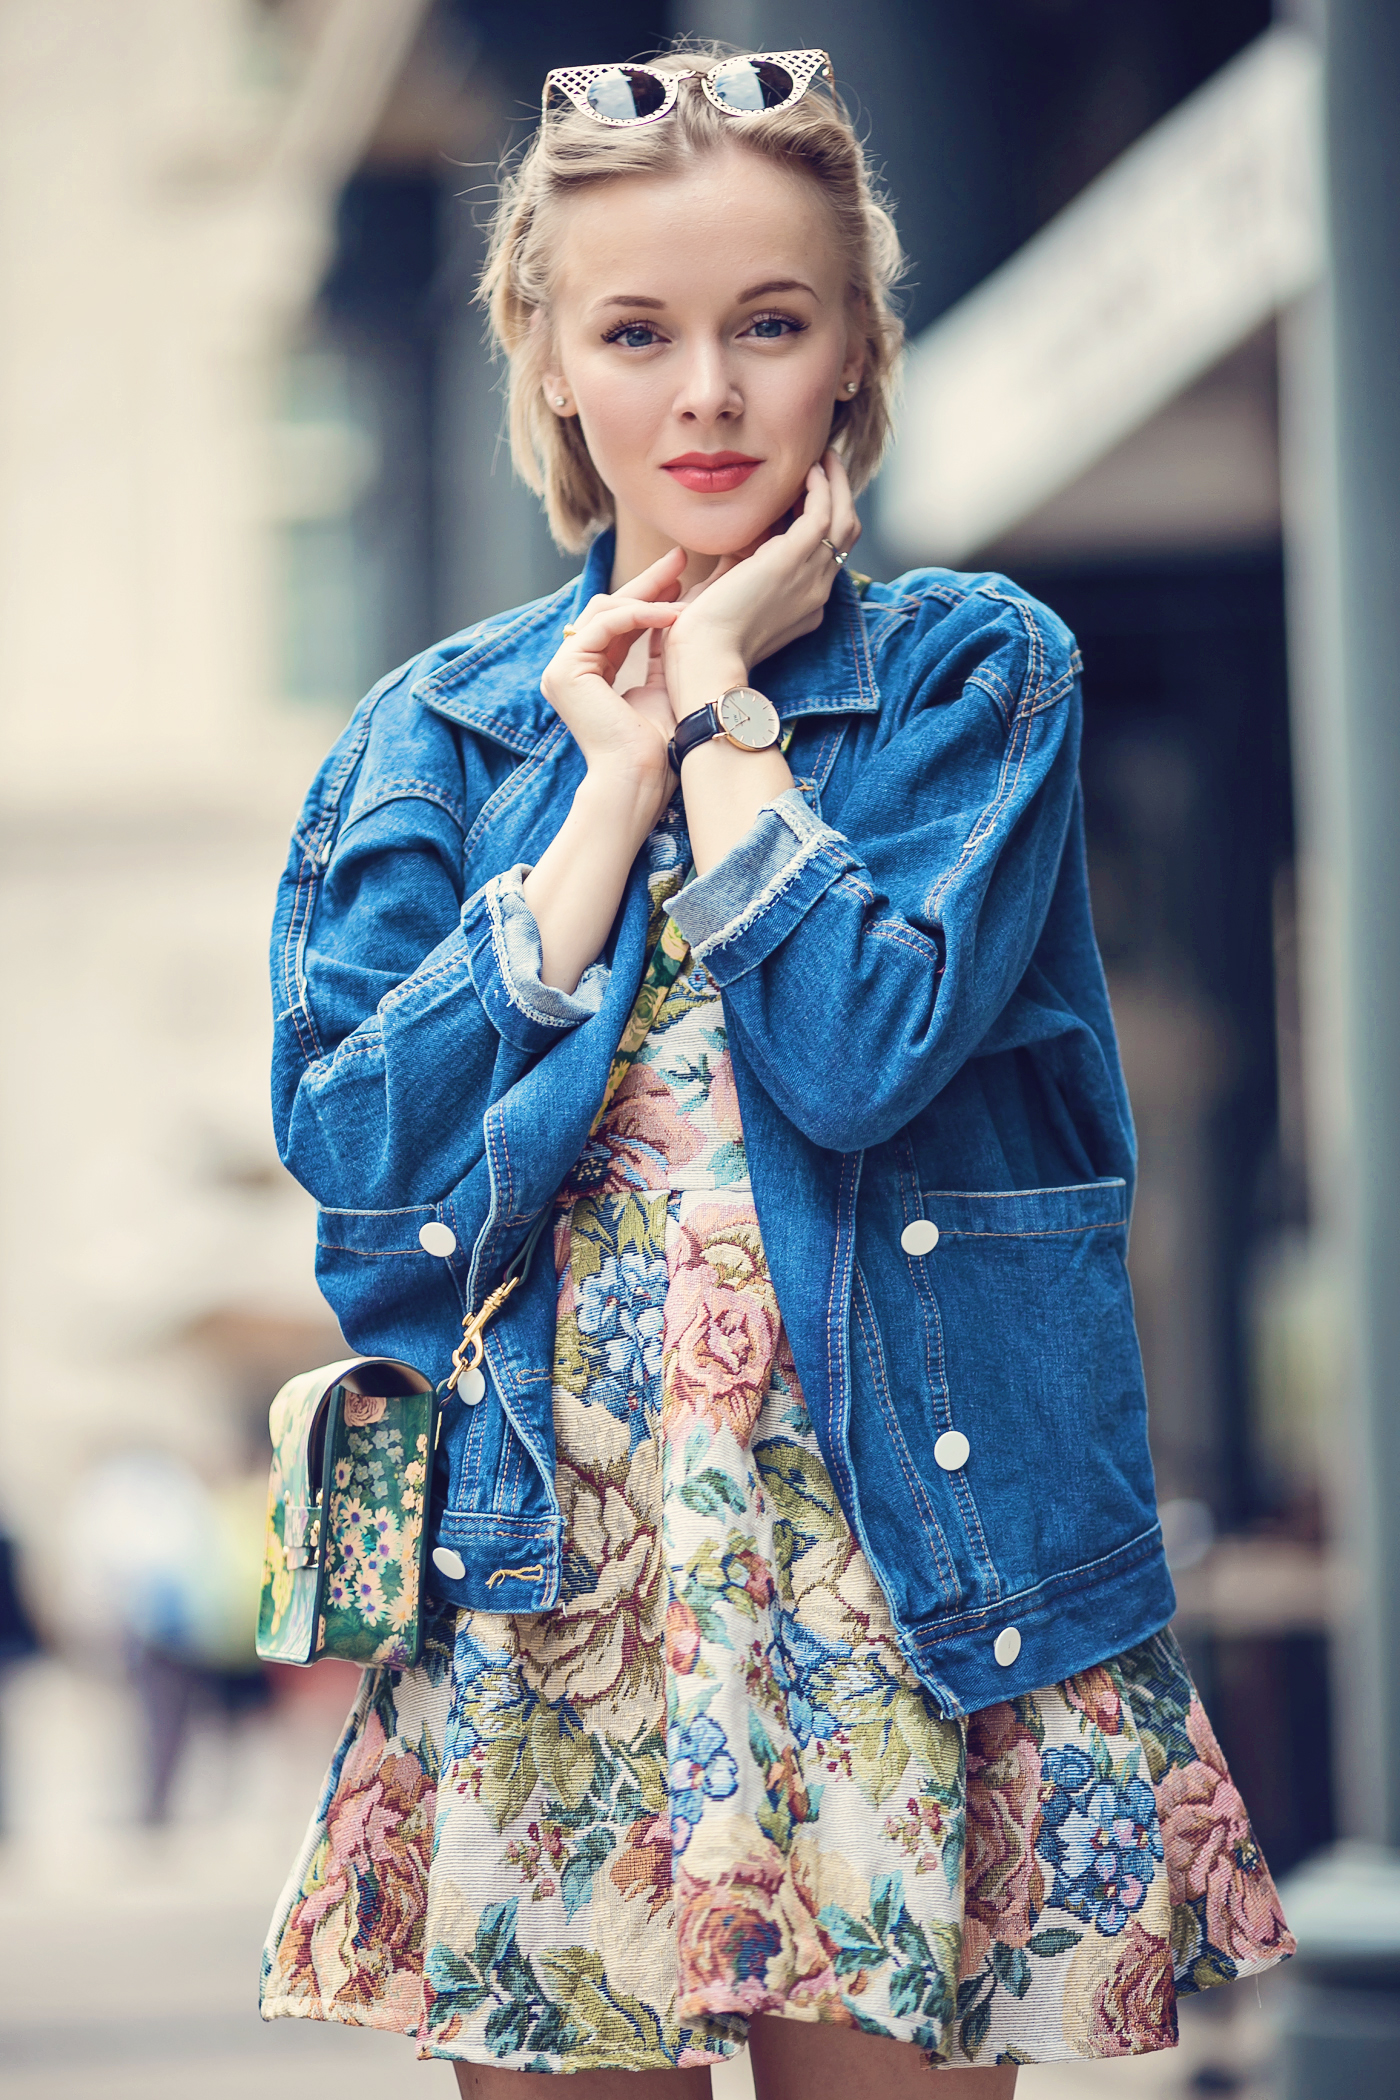 darya kamalova a fashion blogger from thecablook is wearing chicwish dress with denim boyfriend jacket and gold espadrilles with sophie hulme flower bag-42 copy